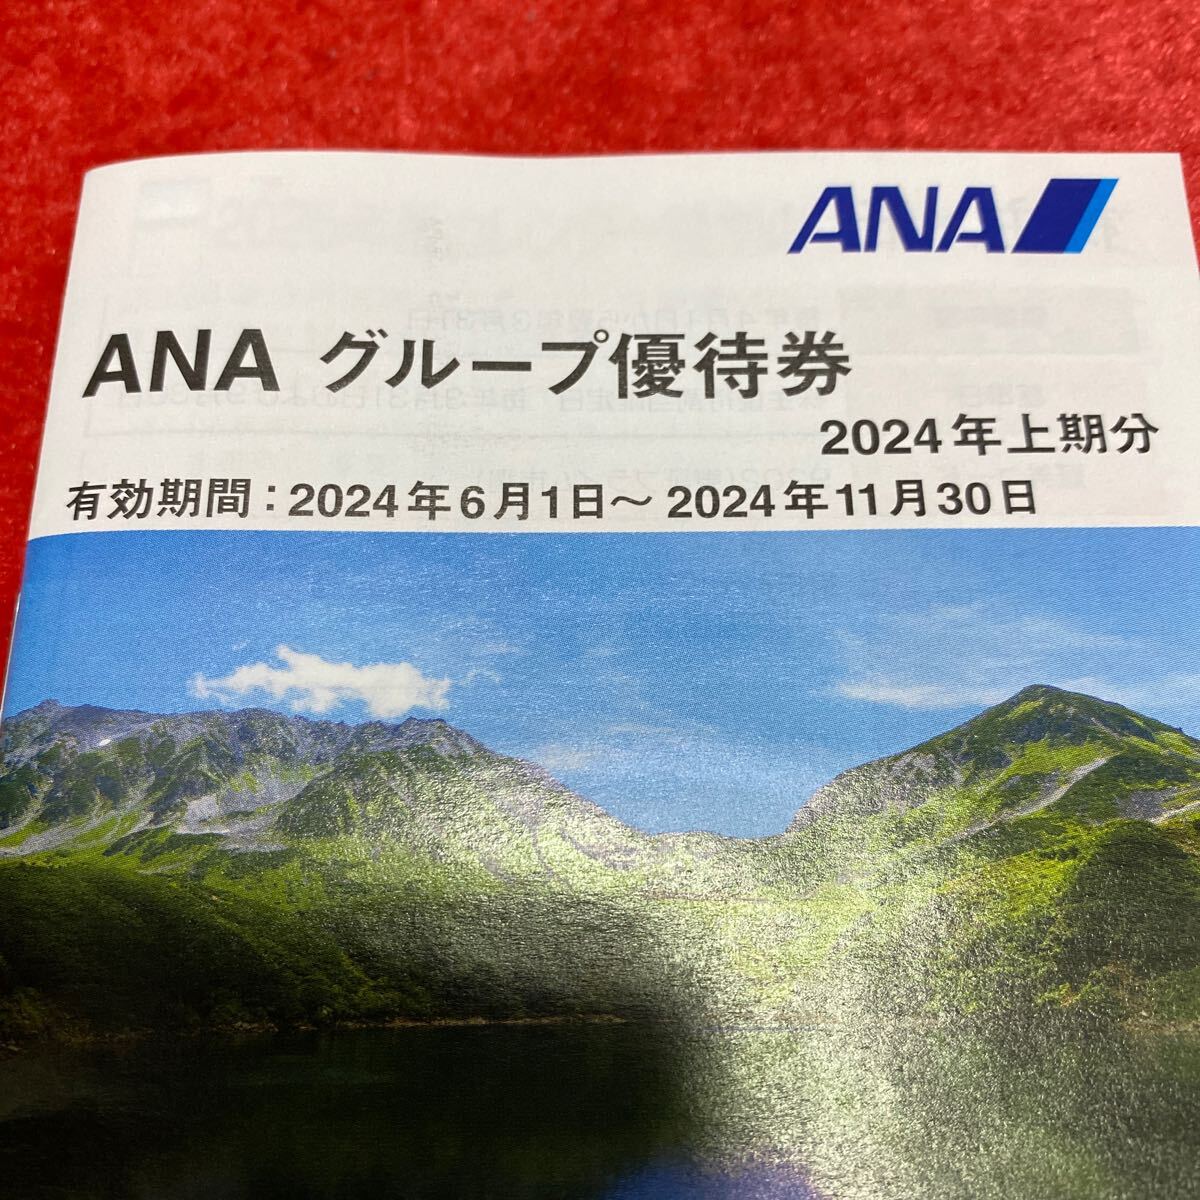 ANA stockholder hospitality number guide paper + group complimentary ticket 